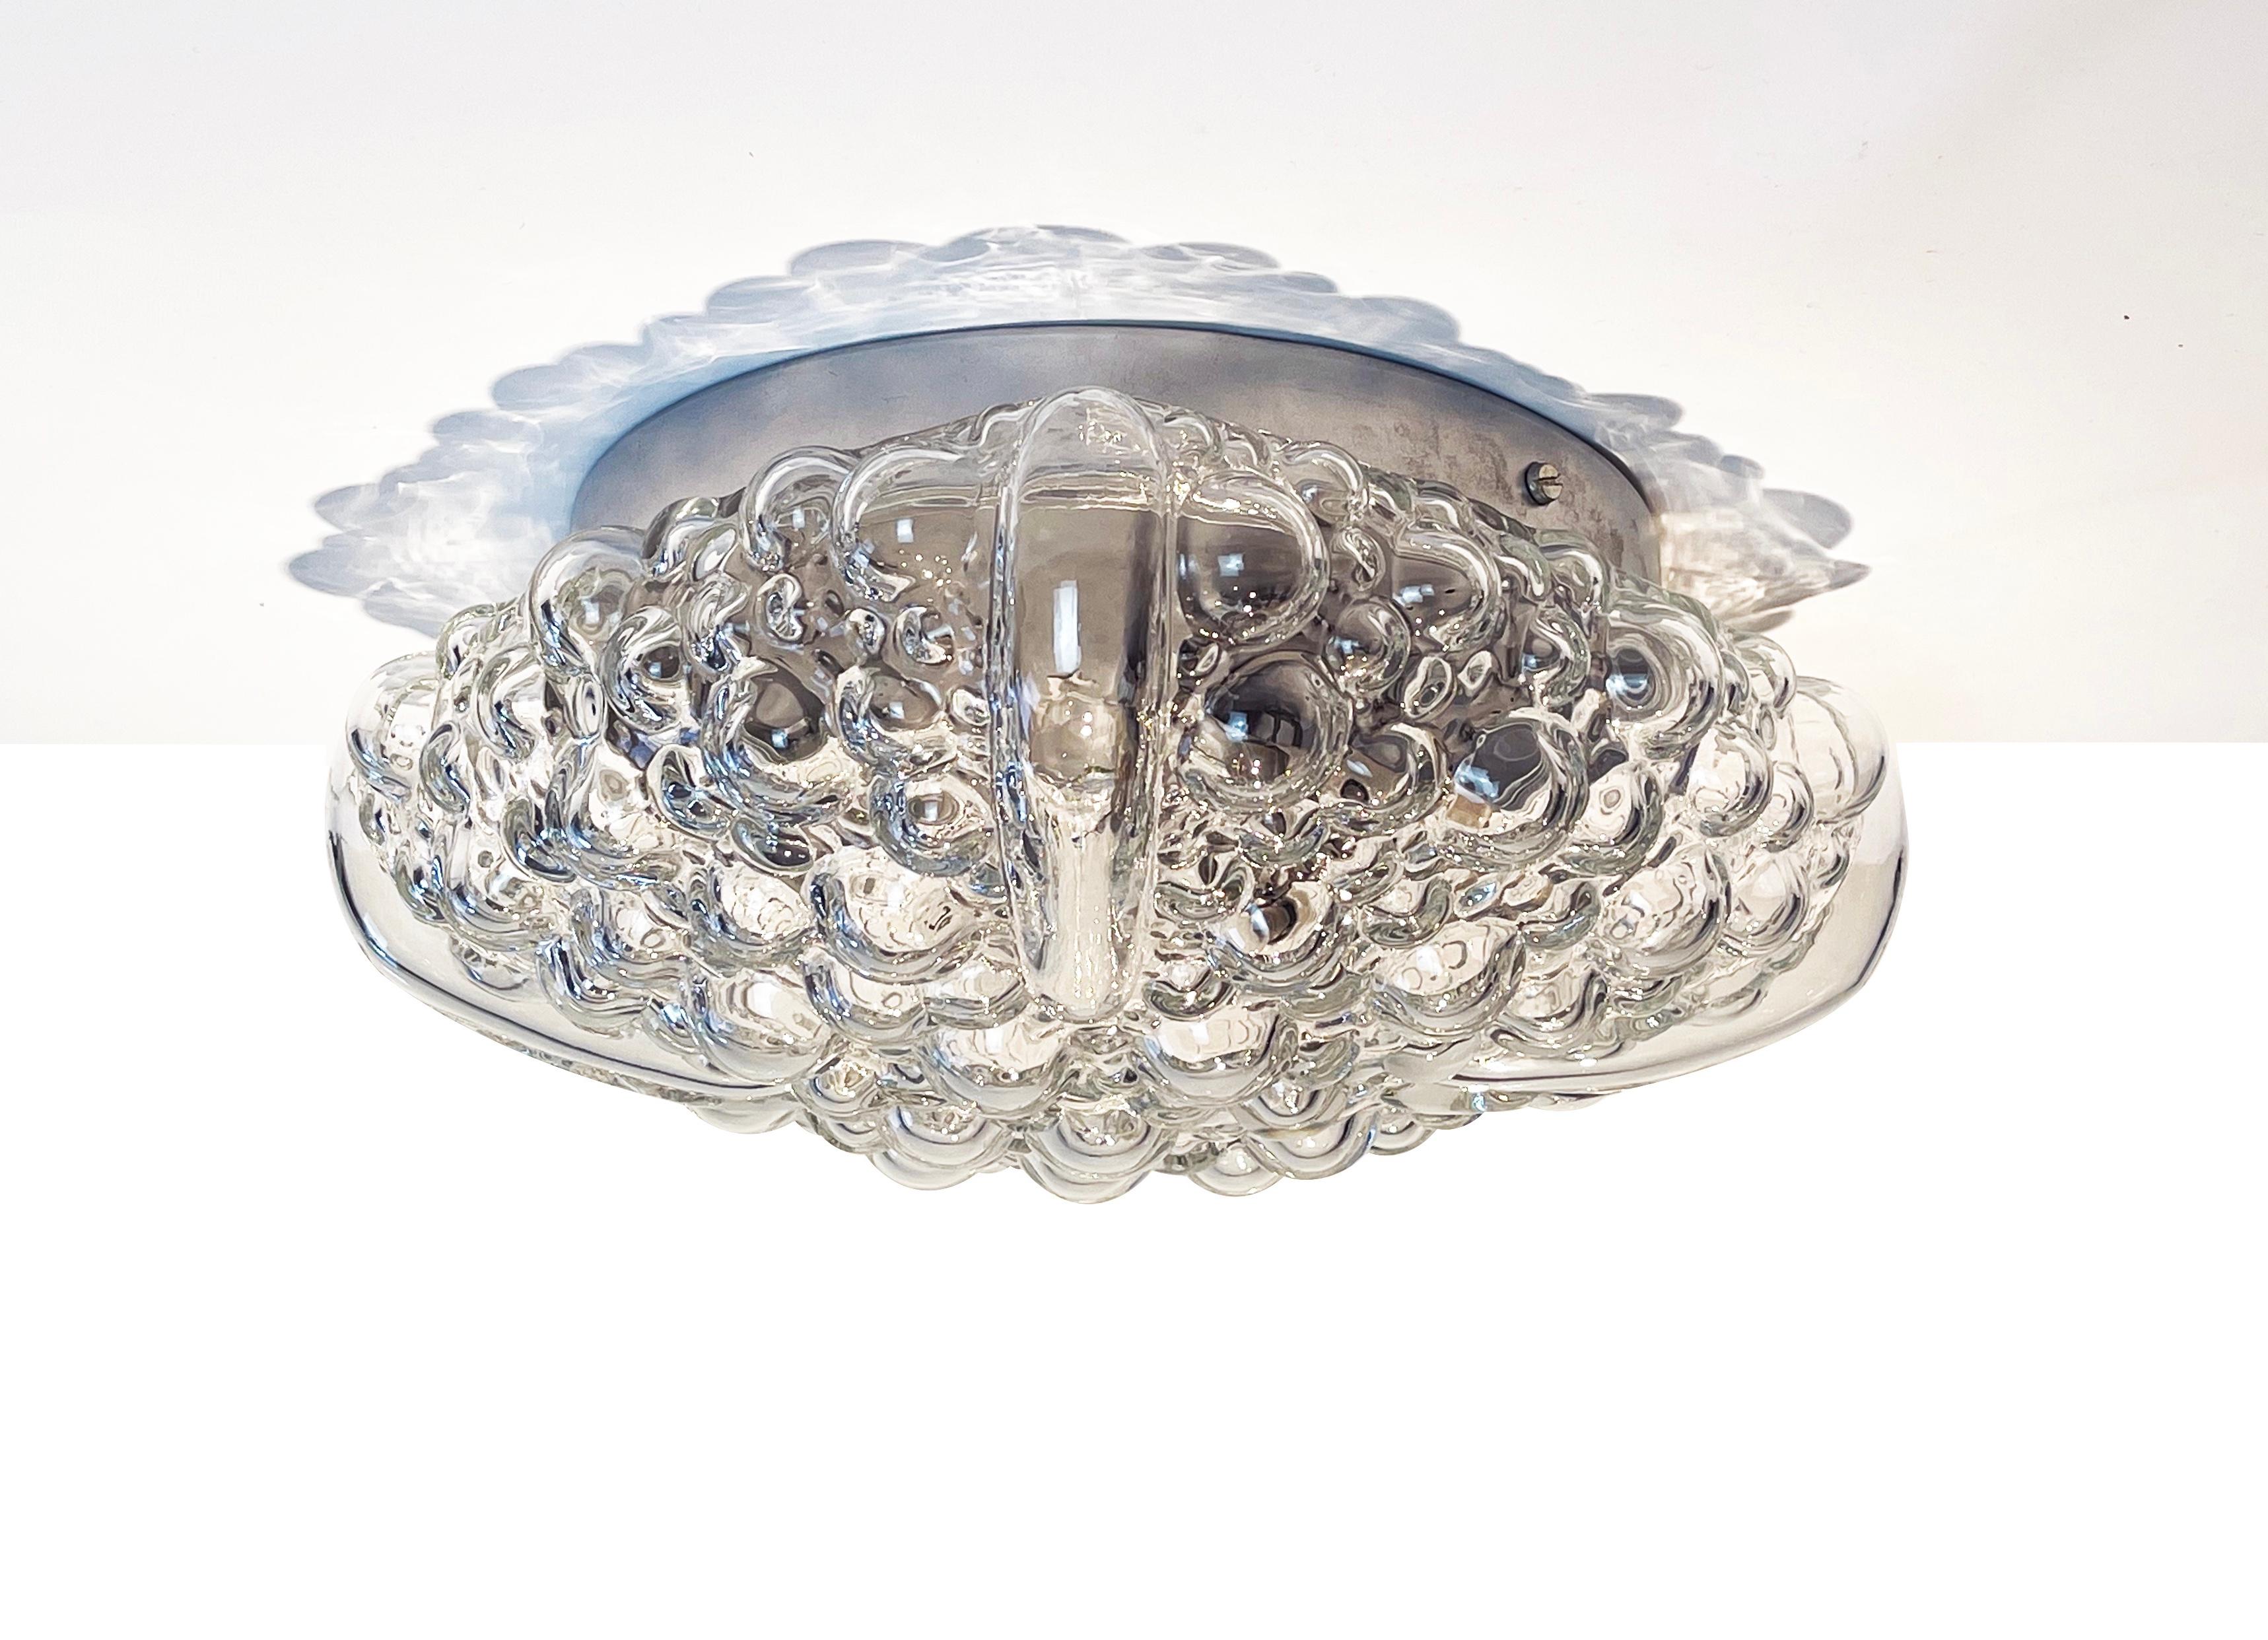 Magnificent, flush base ceiling or wall lamp by ''Hustadt Leuchten'', one of Germans famous mid century manufacturer of high-end design lighting.
Comes in a slightly square but round bubble sea urchin shape and design.

The funky glamorous glas